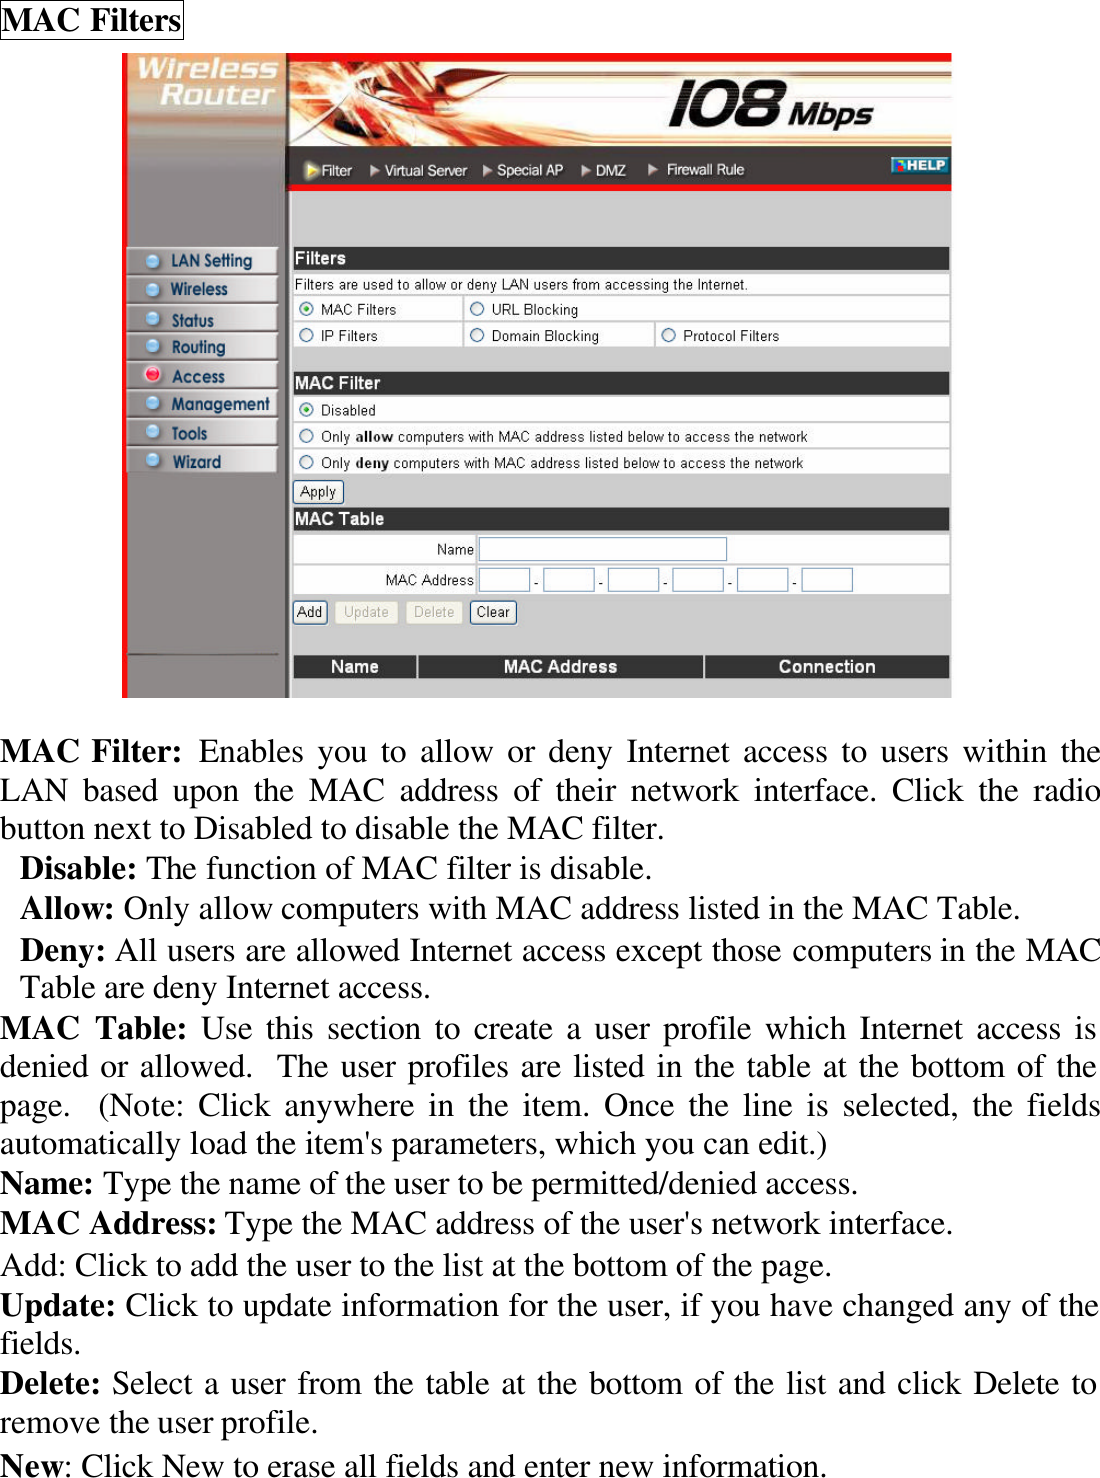 MAC Filters   MAC Filter: Enables you to allow or deny Internet access to users within the LAN based upon the MAC address of their network interface. Click the radio button next to Disabled to disable the MAC filter. Disable: The function of MAC filter is disable. Allow: Only allow computers with MAC address listed in the MAC Table. Deny: All users are allowed Internet access except those computers in the MAC Table are deny Internet access. MAC Table: Use this section to create a user profile which Internet access is denied or allowed.  The user profiles are listed in the table at the bottom of the page.  (Note: Click anywhere in the item. Once the line is selected, the fields automatically load the item&apos;s parameters, which you can edit.) Name: Type the name of the user to be permitted/denied access. MAC Address: Type the MAC address of the user&apos;s network interface. Add: Click to add the user to the list at the bottom of the page. Update: Click to update information for the user, if you have changed any of the fields. Delete: Select a user from the table at the bottom of the list and click Delete to remove the user profile. New: Click New to erase all fields and enter new information. 